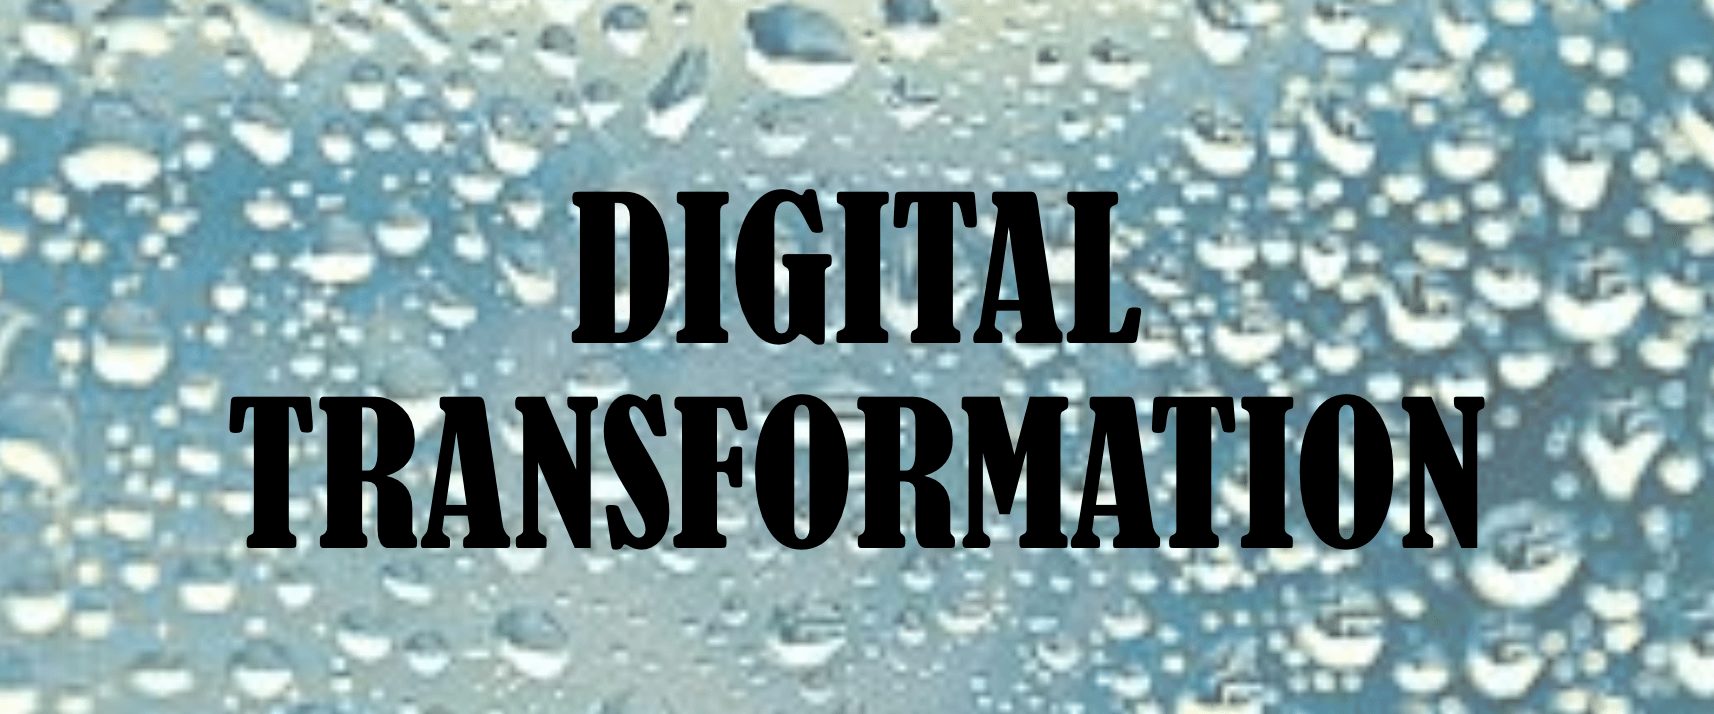 Digital Transformation is like drying your body…